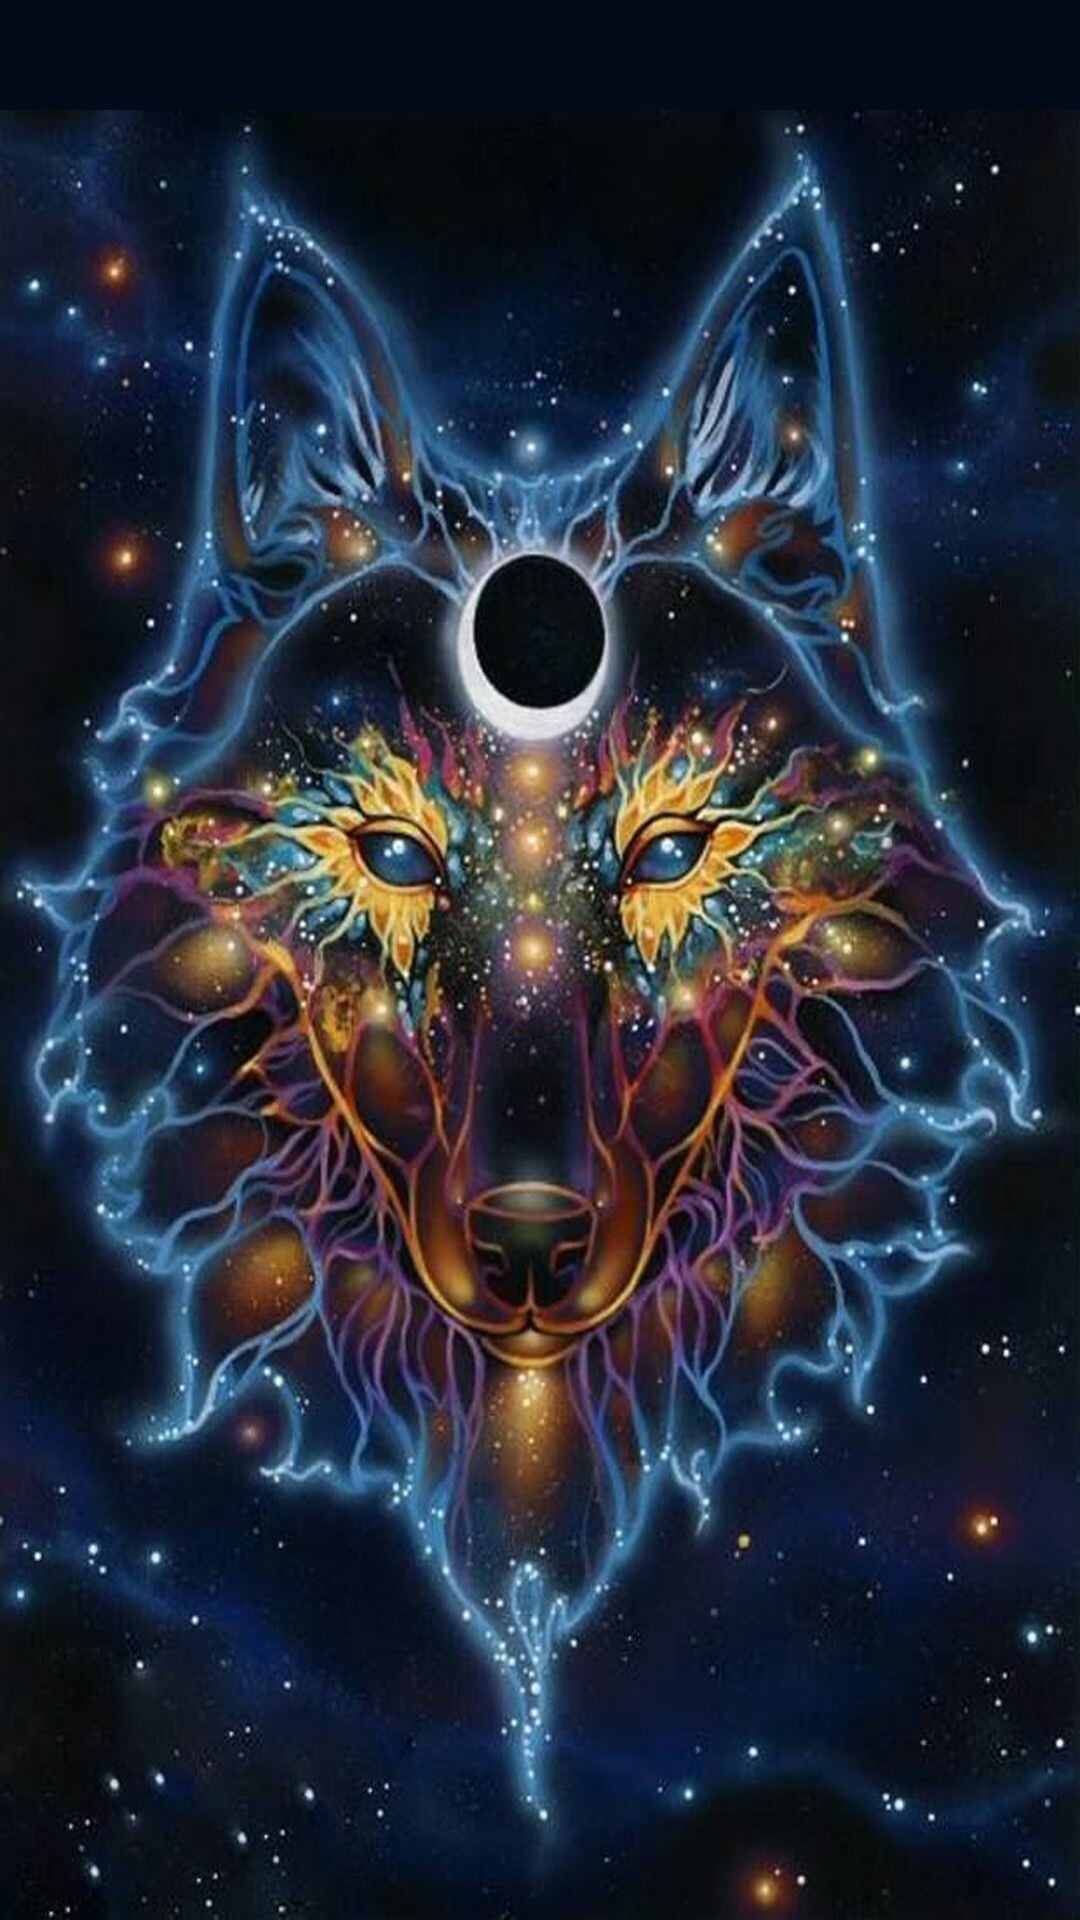 HD wallpaper, Ancient Wisdom, Celtic Wolf Art, Mythical Creature, Tribal Symbolism, 1080X1920 Full Hd Phone, Phone 1080P Wolf Wallpaper Image